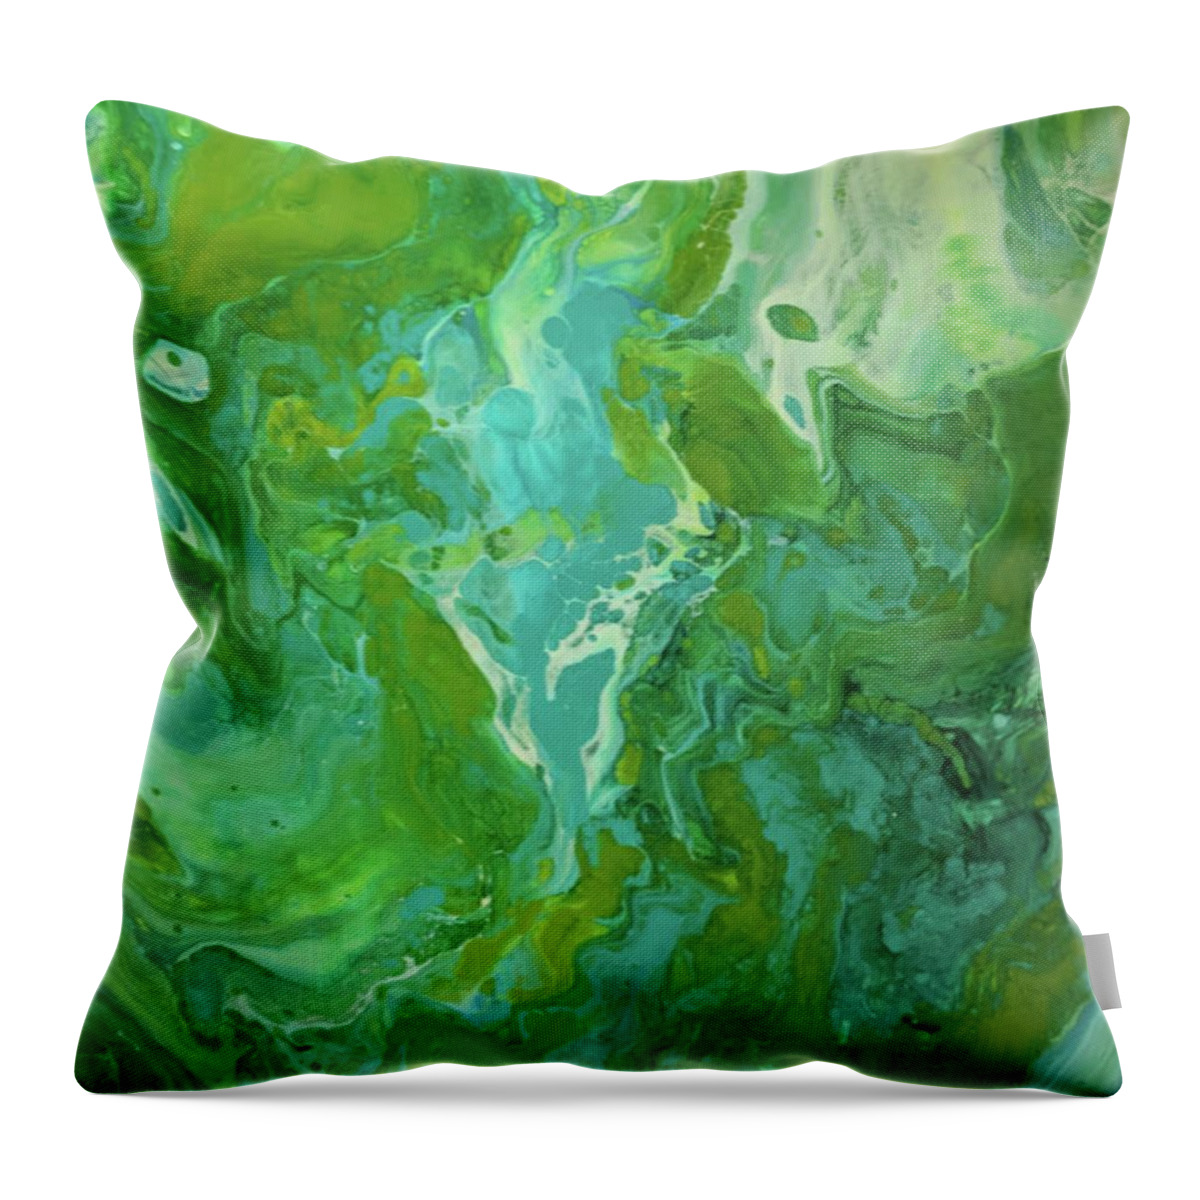 Water Throw Pillow featuring the painting Green Waters by Kathy Sheeran